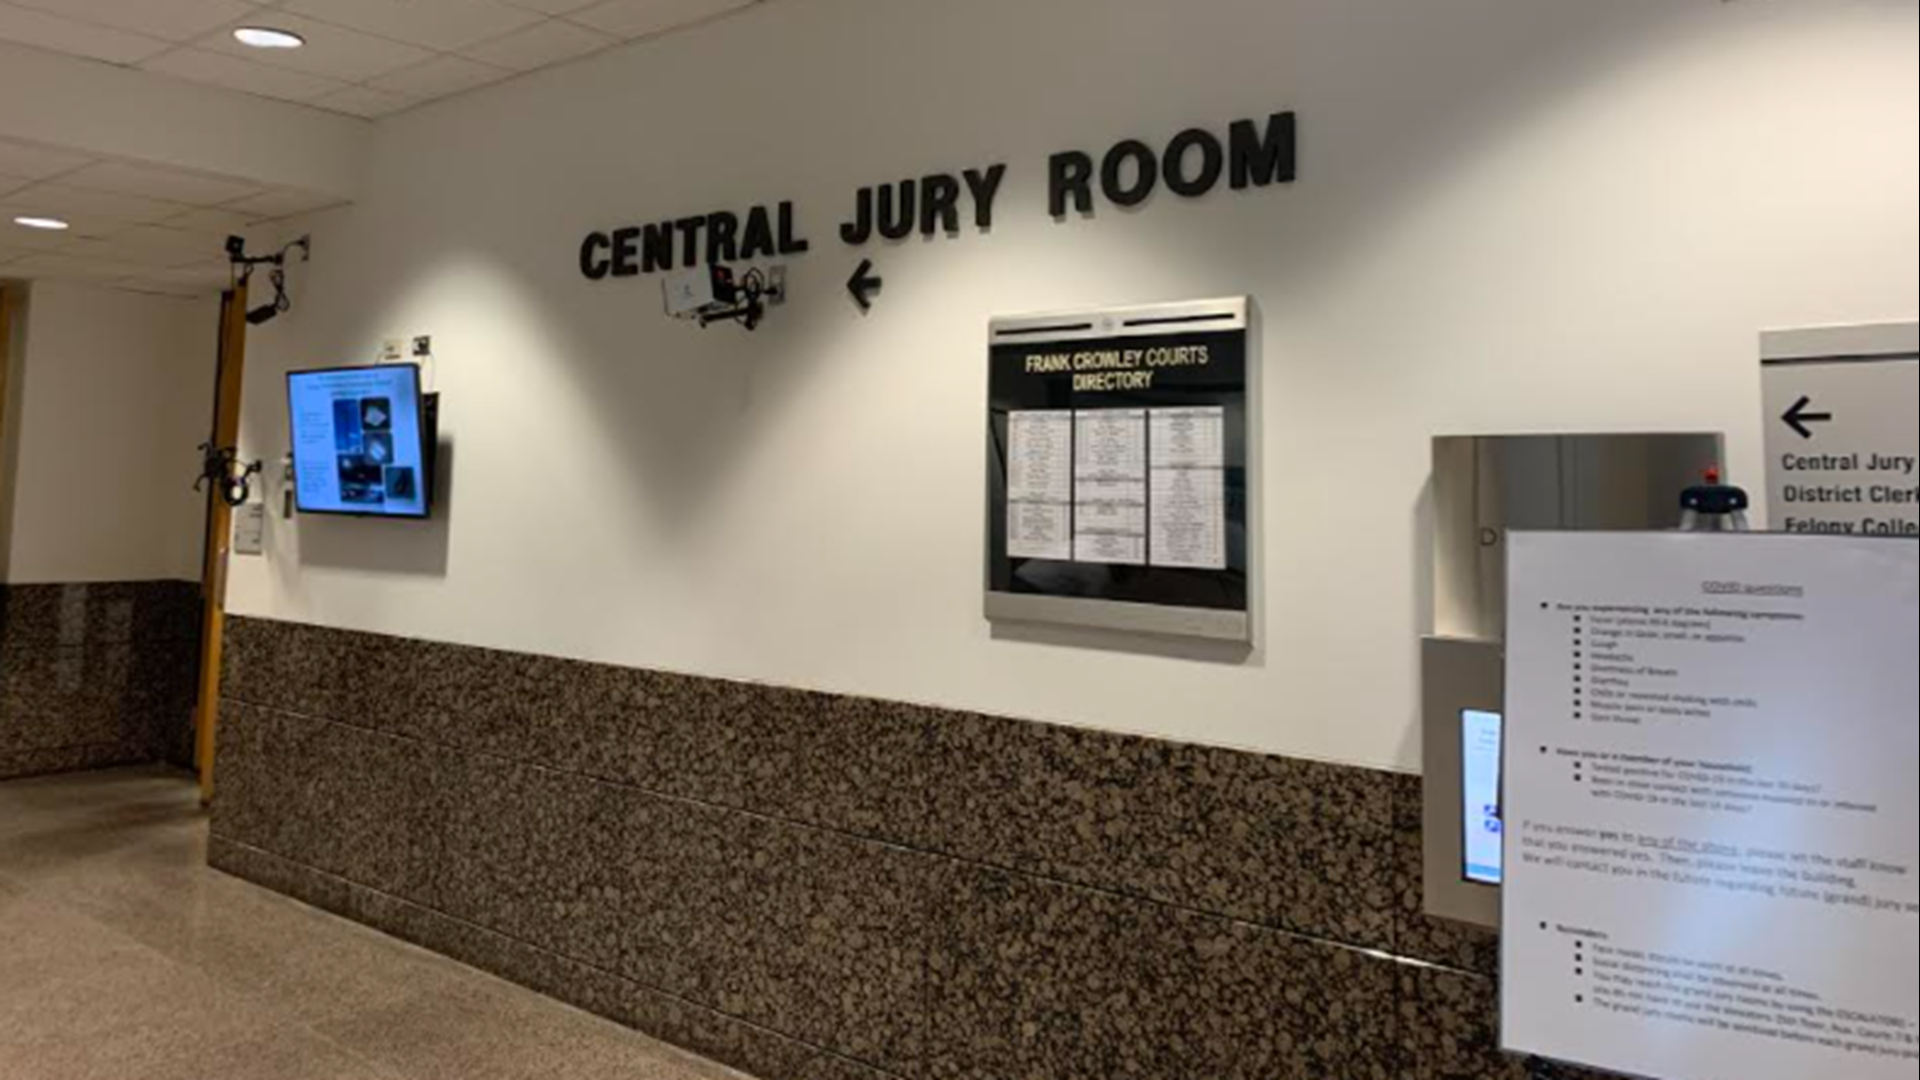 Dallas County jury trials stopped during COVID but resumed June 1. Judges and attorneys say cases are backlogged for months, possibly years.